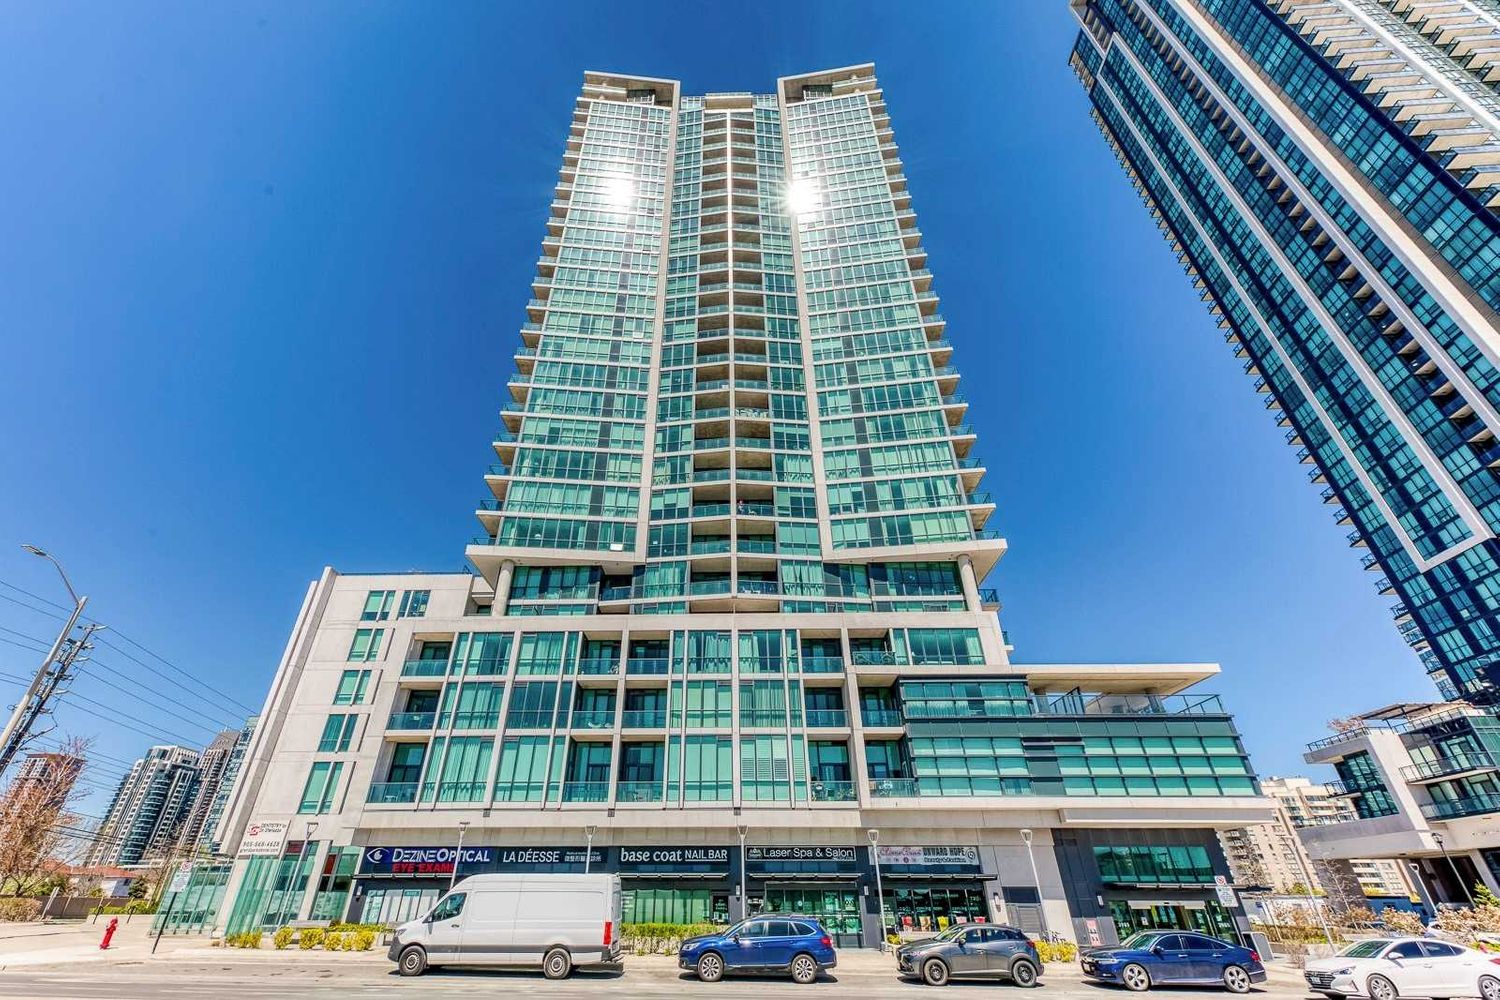 3985 Grand Park Drive. Pinnacle Grand Park Condos is located in  Mississauga, Toronto - image #2 of 2